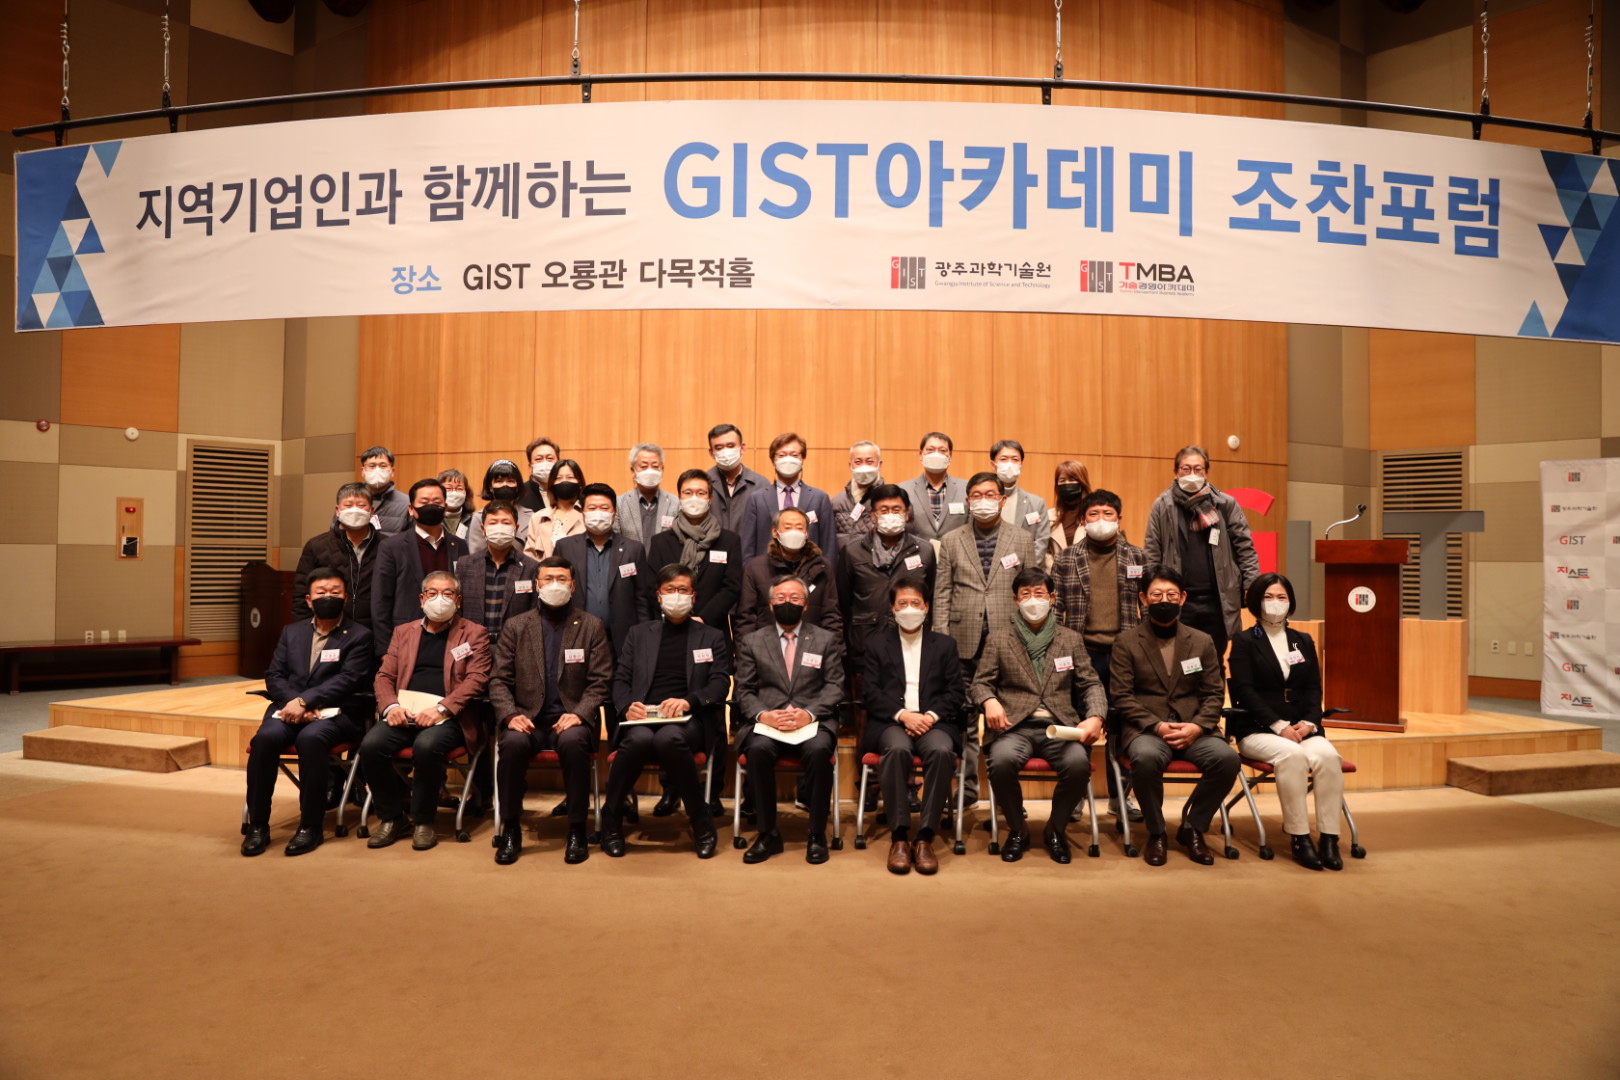 GIST Academy held a breakfast forum in November about 'How to come up with excellent ideas' 이미지